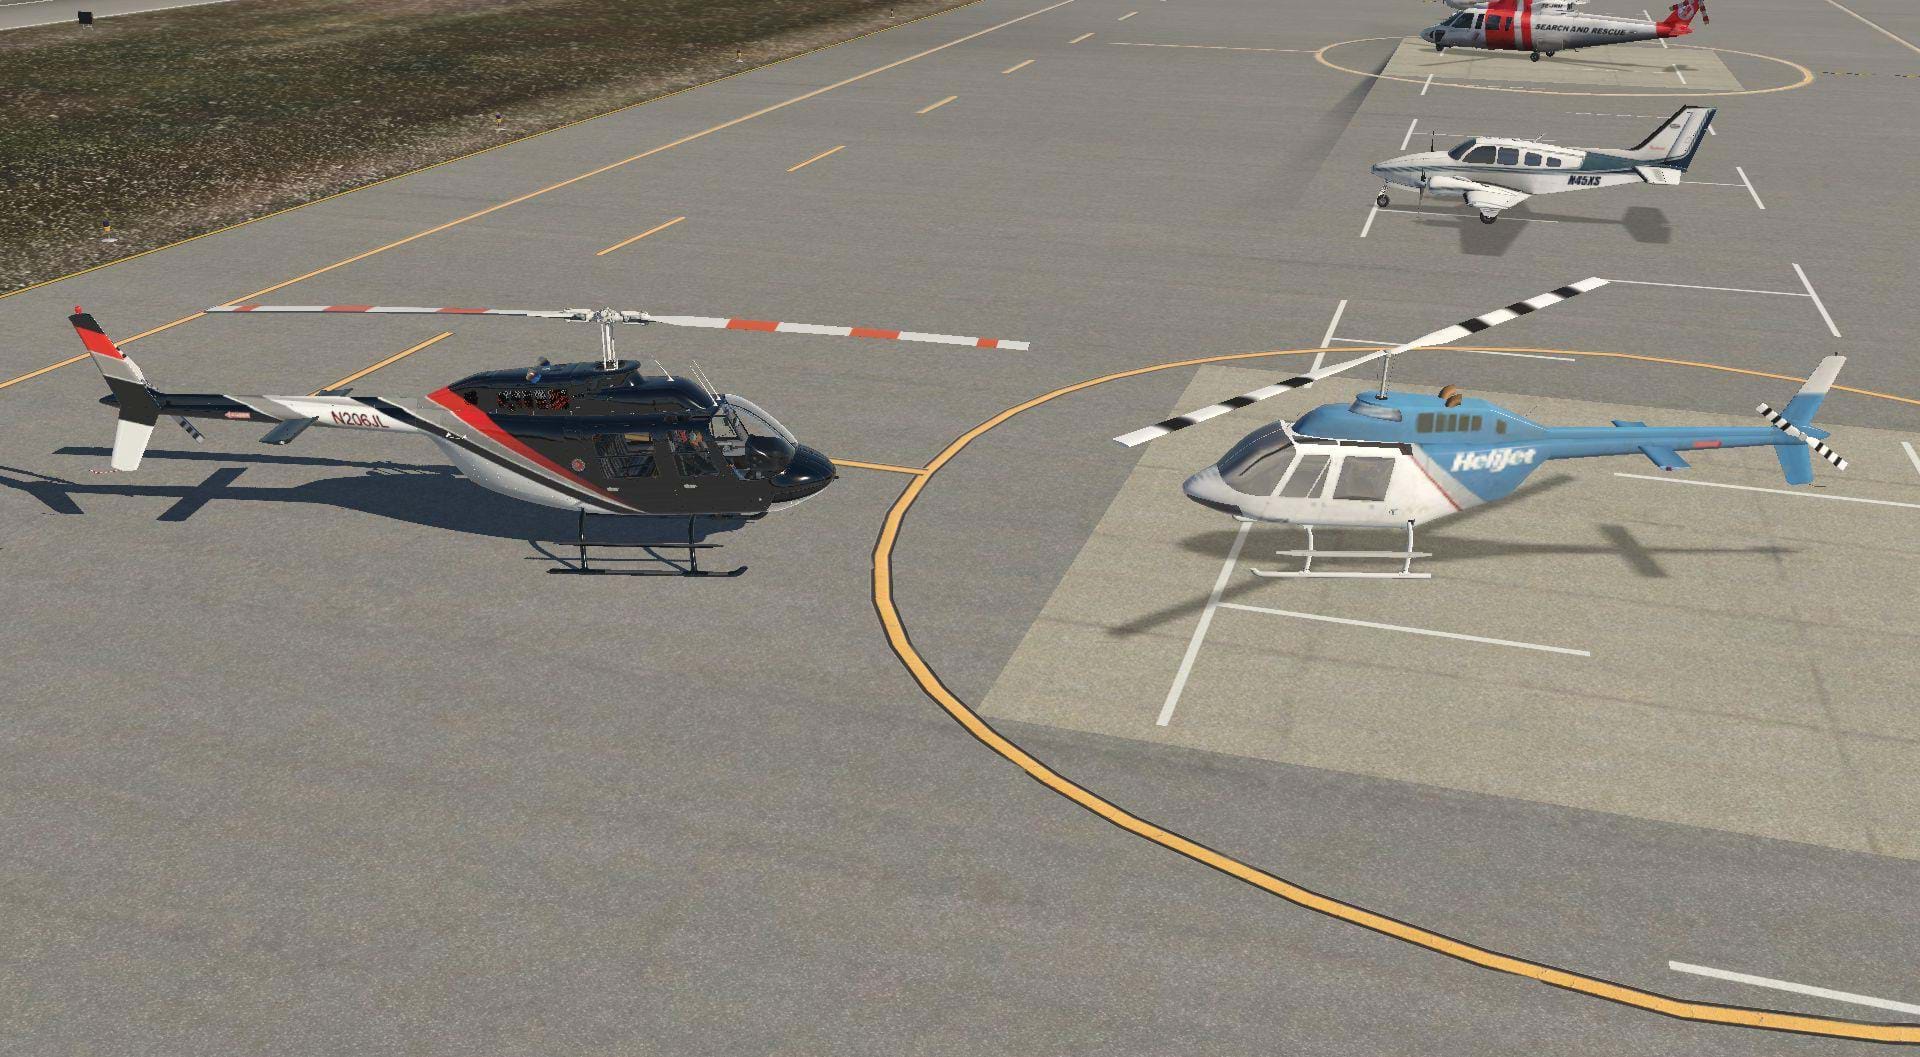 Bell 206 in X-Plane - where it started and how it's going